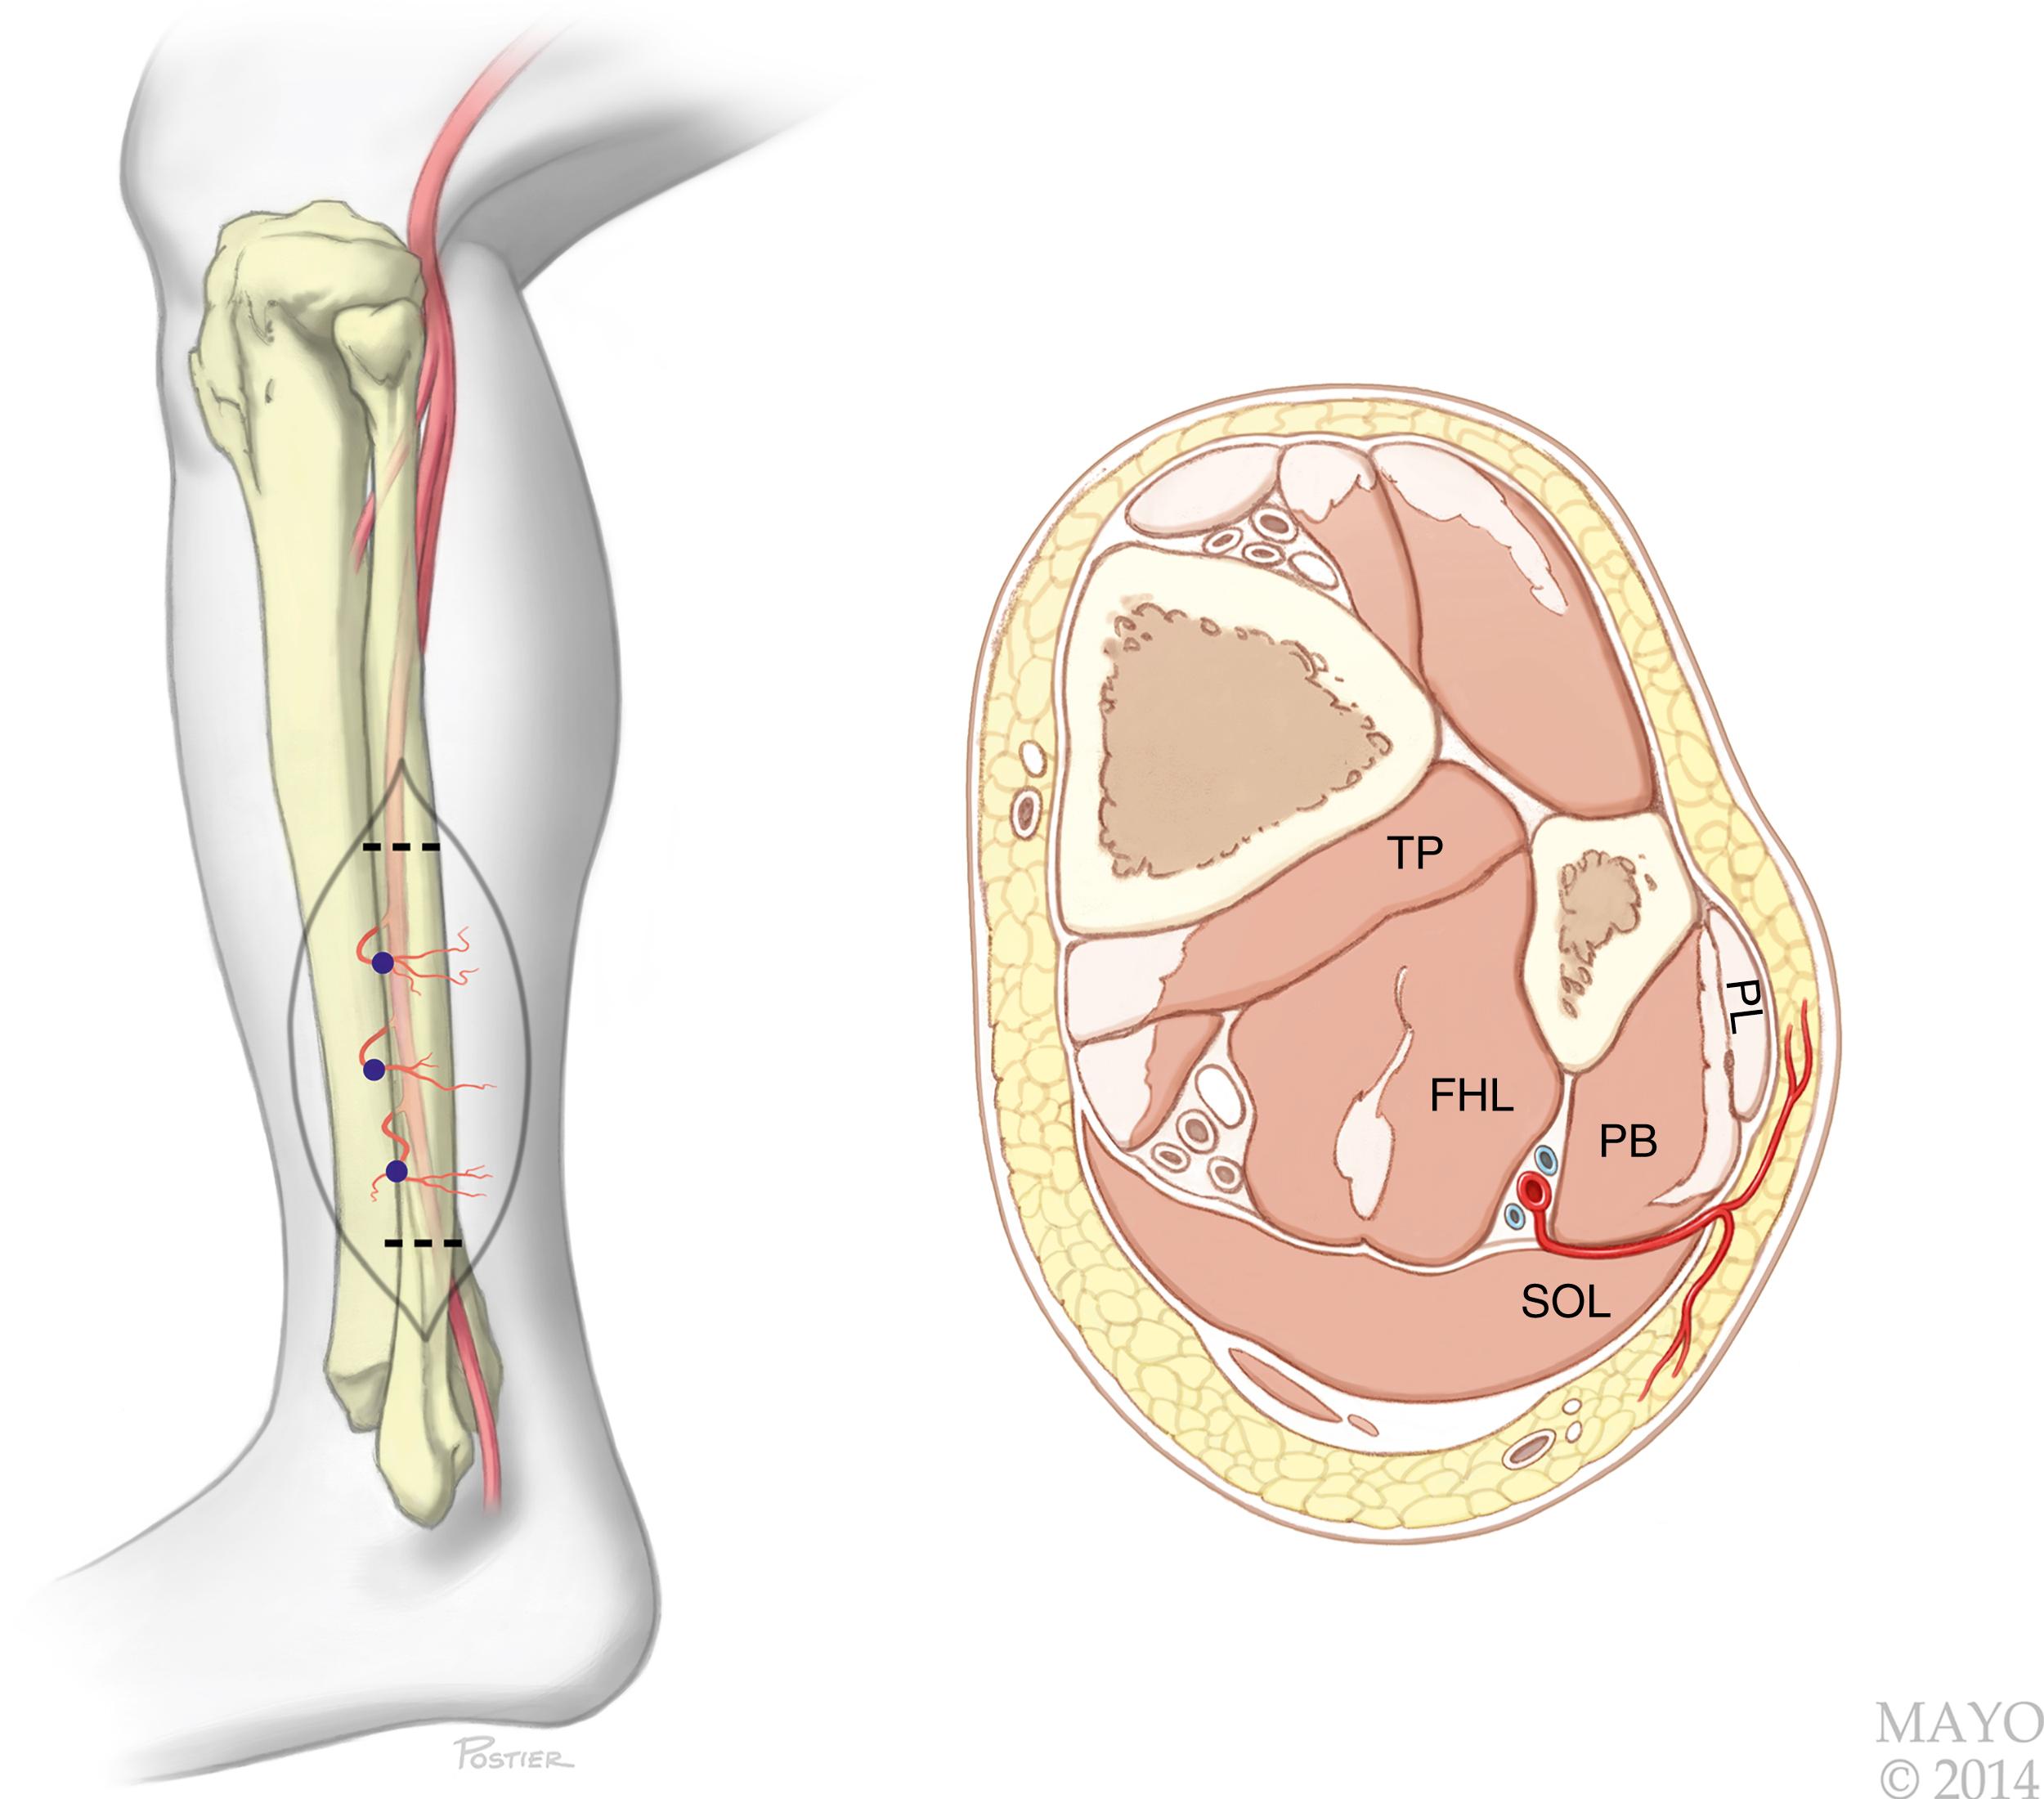 Fig. 46.4, Harvest of a fibular free bone graft is performed from a lateral approach. The initial dissection is between the peroneus longus and the soleus. In this middle-third cross-sectional view, the peroneal vessels lie between the flexor hallucis longus and the tibialis posterior muscles. EDL, Extensor digitorum longus; EHL, extensor hallucis longus; FHL, flexor hallucis longus.